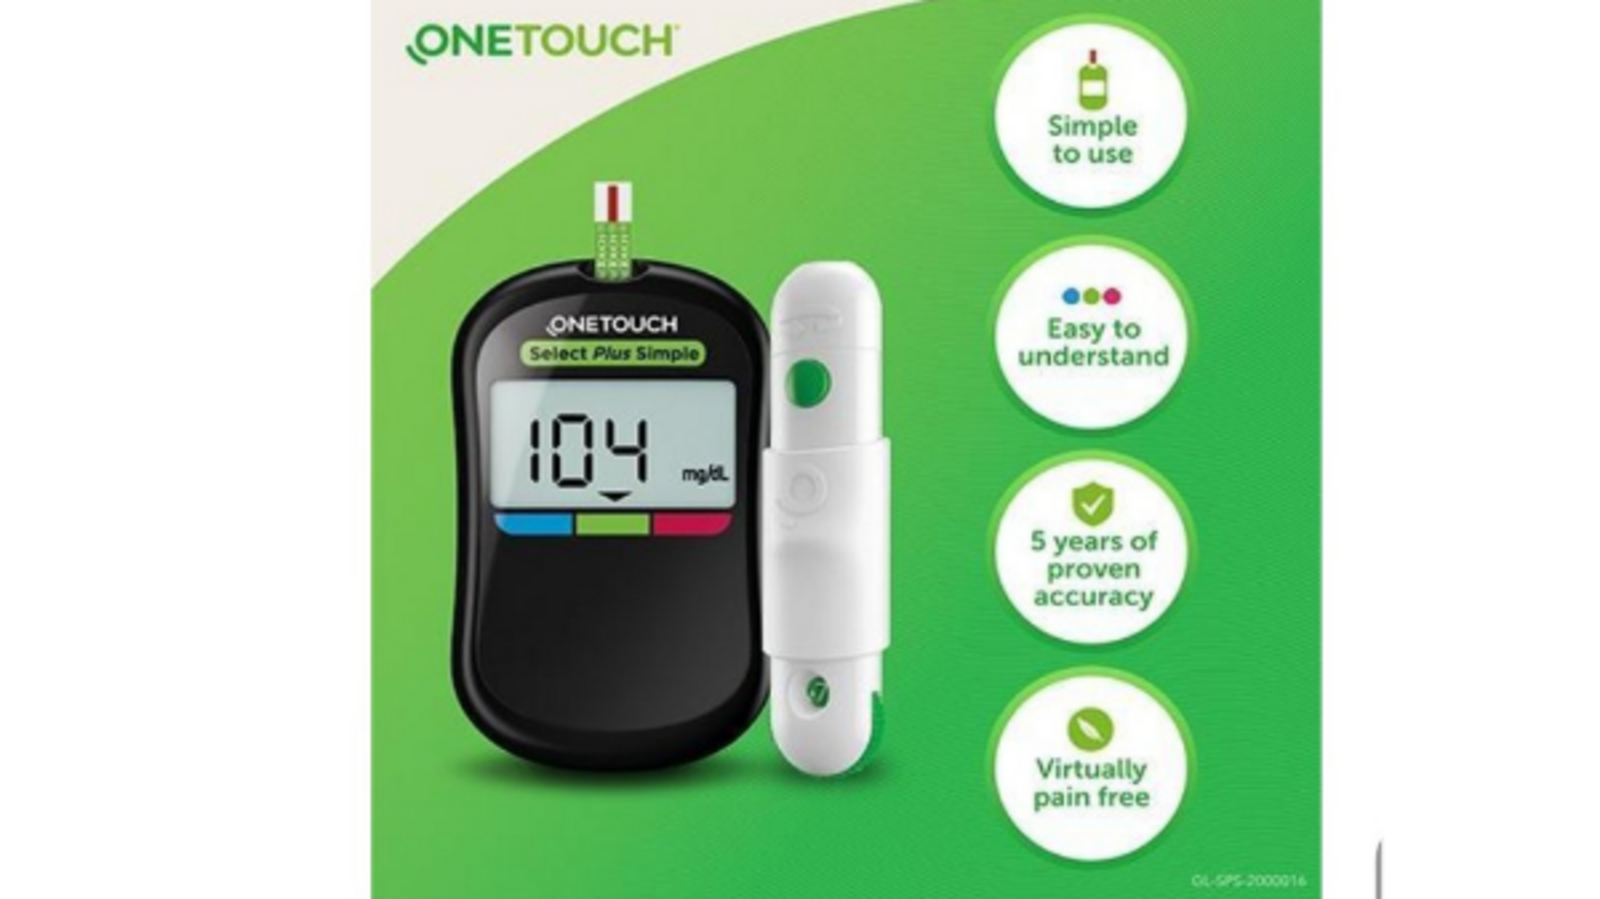 Blood Glucose Meters offer accurate selfmonitoring of blood